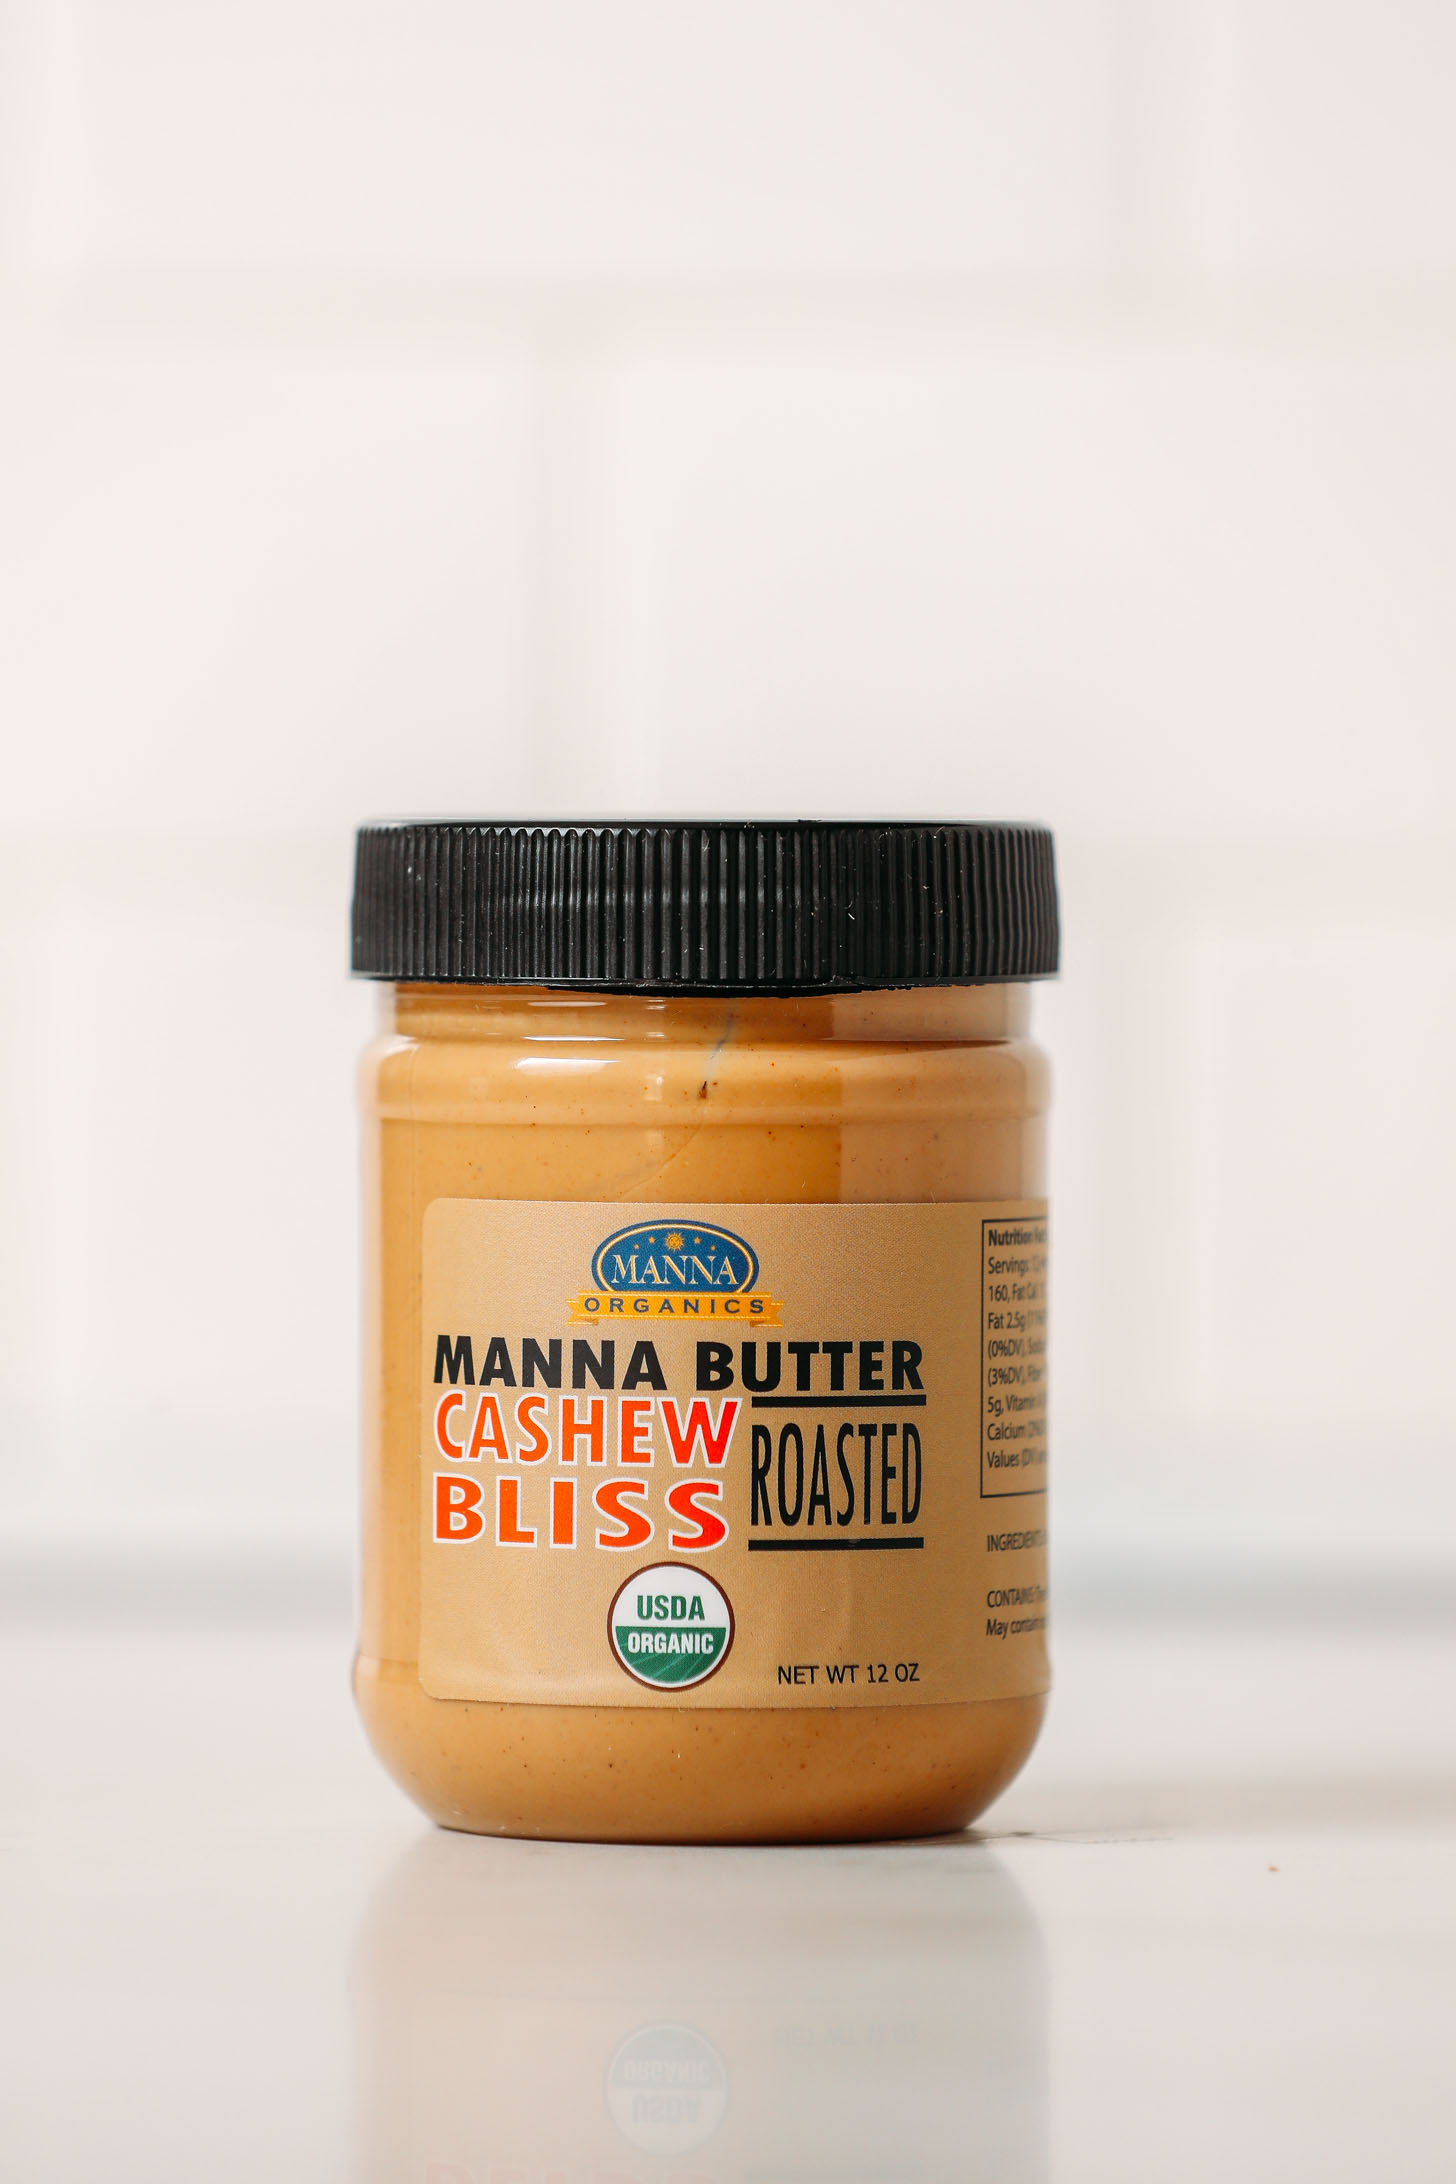 Jar of Manna Organics Cashew Bliss Butter for our unbiased cashew butters review